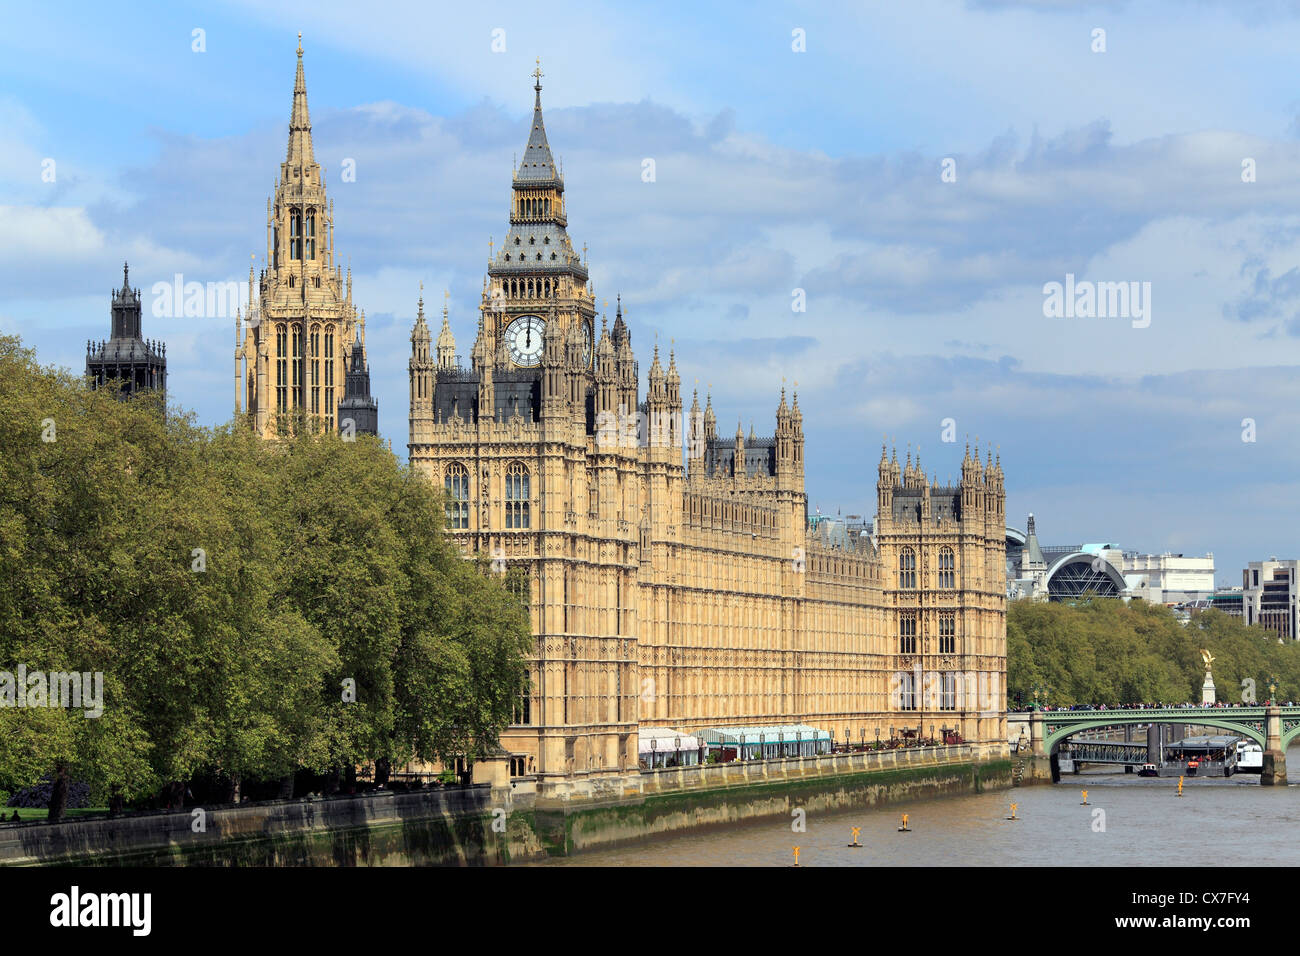 The Palace of Westminster (Houses of Parliament), London, UK Stock Photo